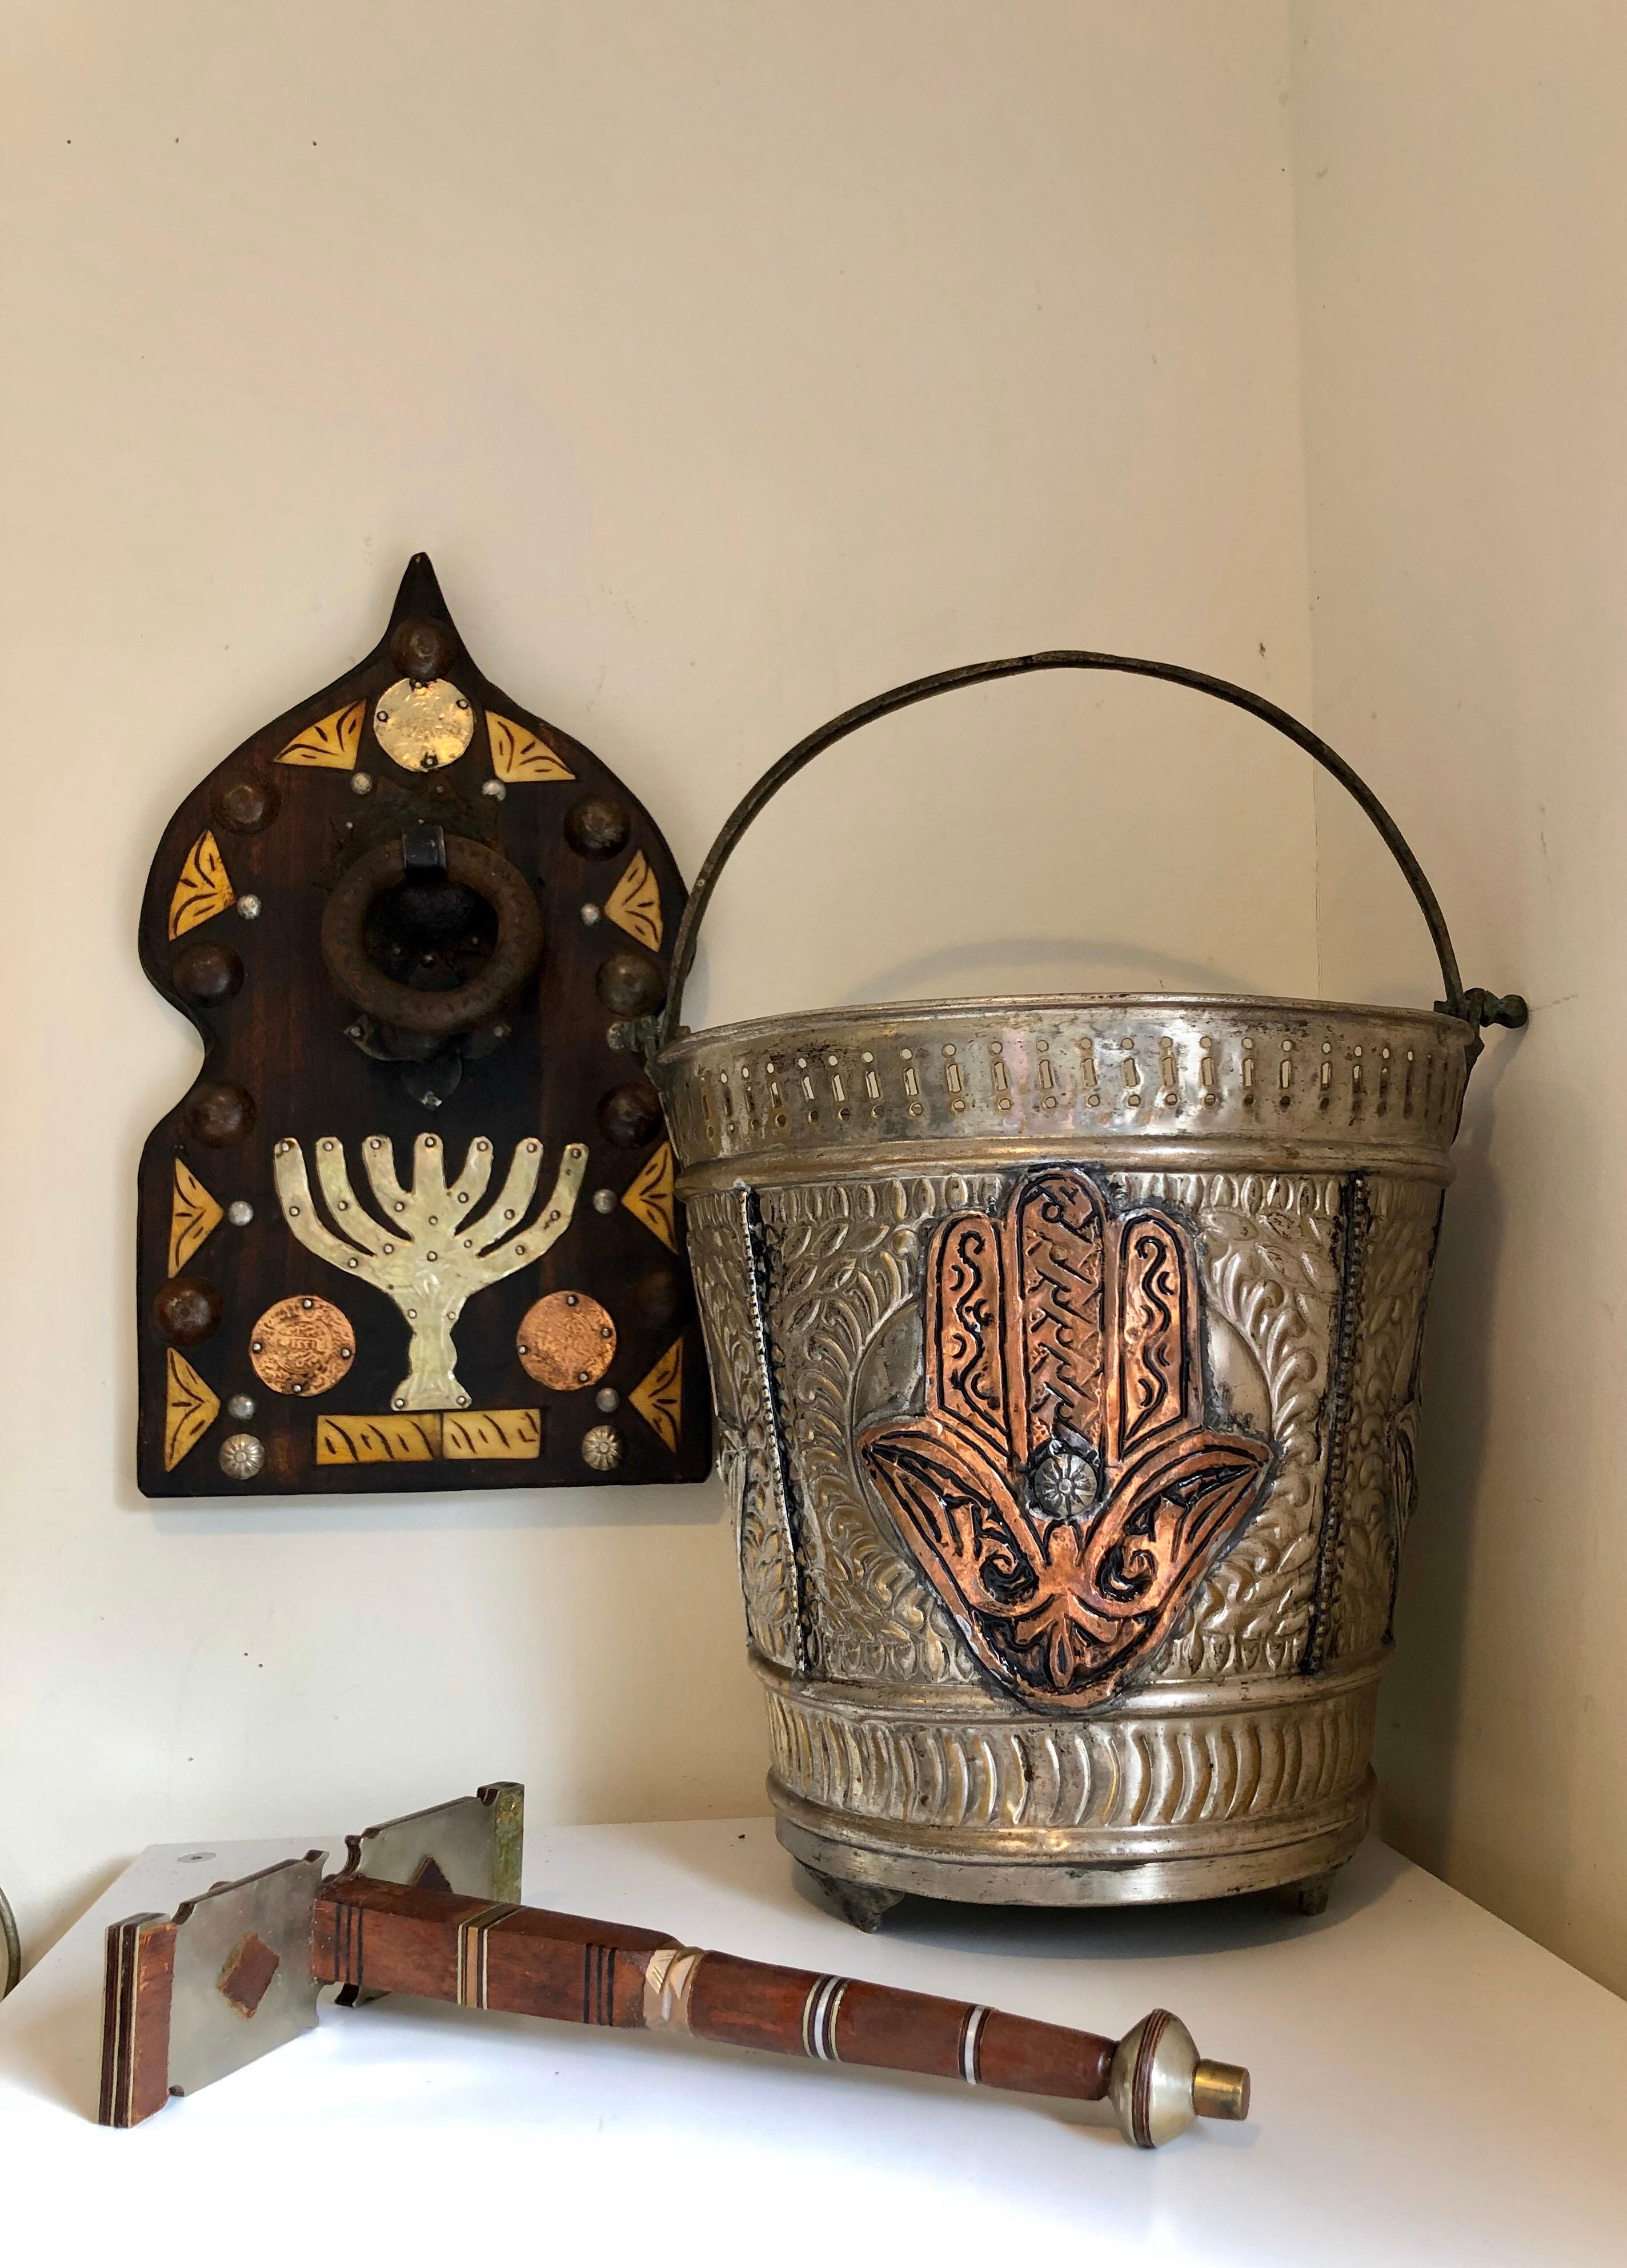 Preserved in excellent condition, this Jewish Door Knocker is made of beautiful, richly colored hand carved Tamarisk wood. Directly underneath the knocker is a cut brass menorah, with two coins on each side dated Islamic year 1331 (1912). There is